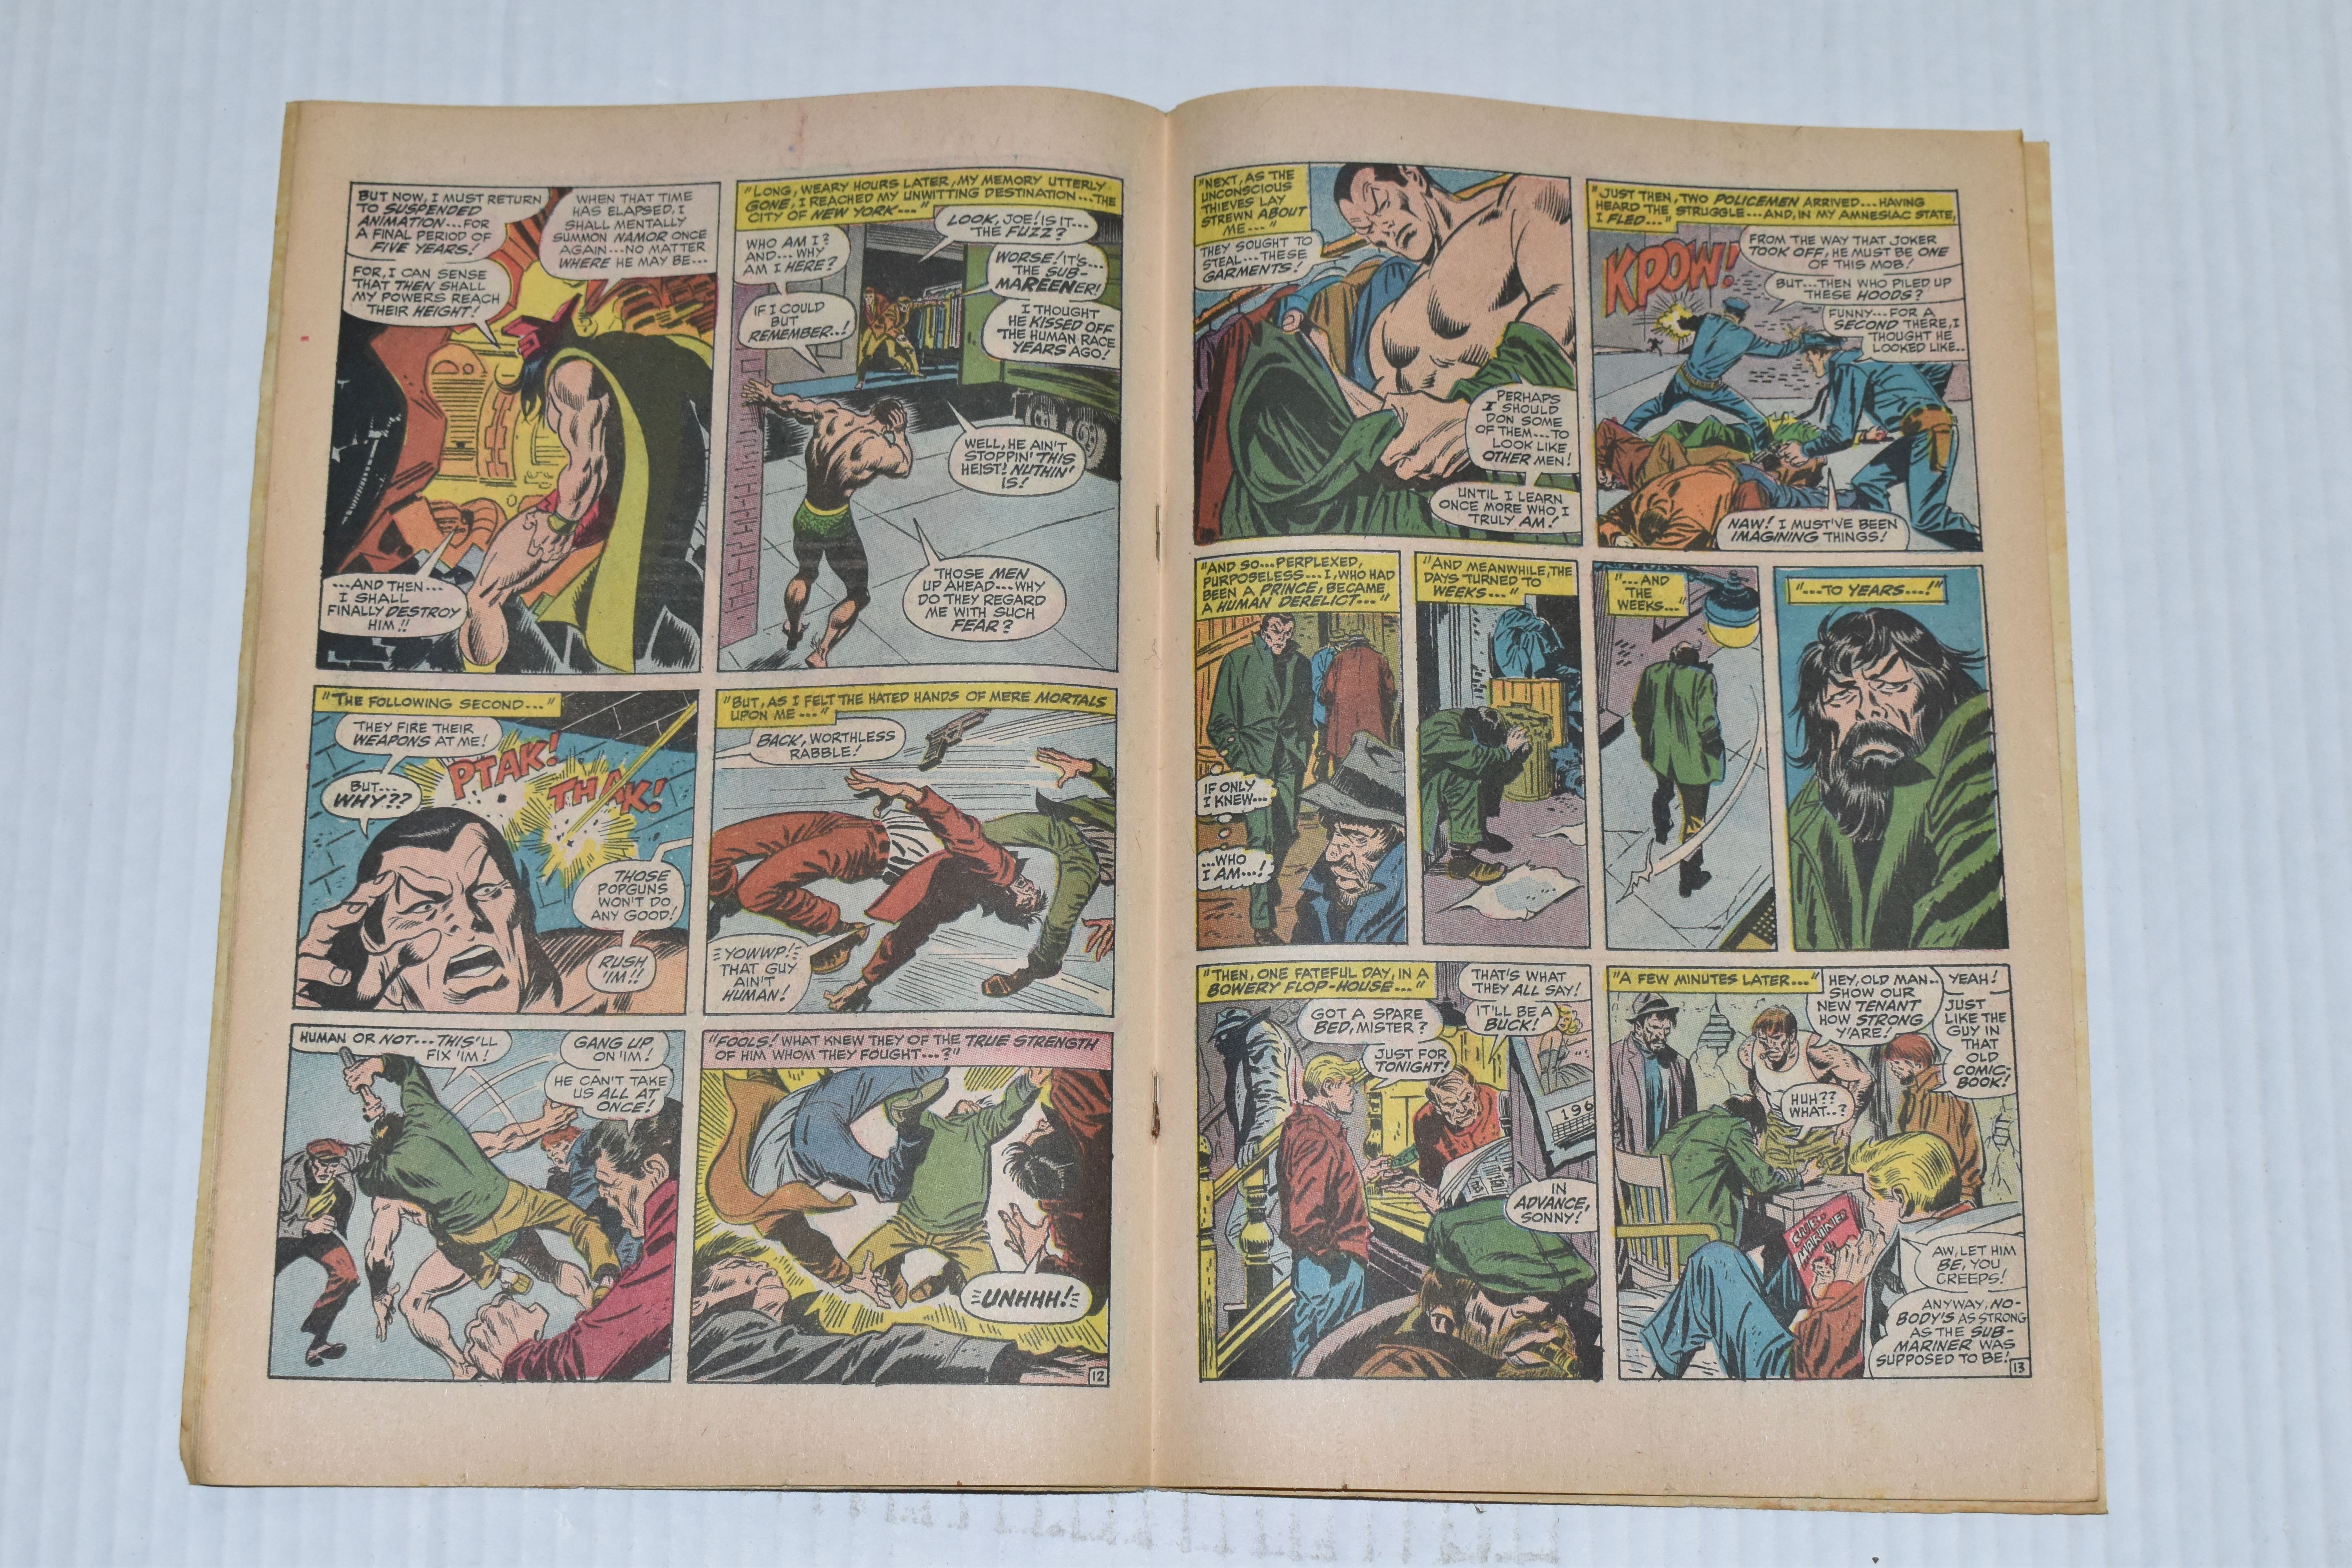 SUB-MARINER NO. 1 MARVEL COMIC, first Silver Age solo Sub-Mariner comic, comic shows signs of - Image 4 of 4